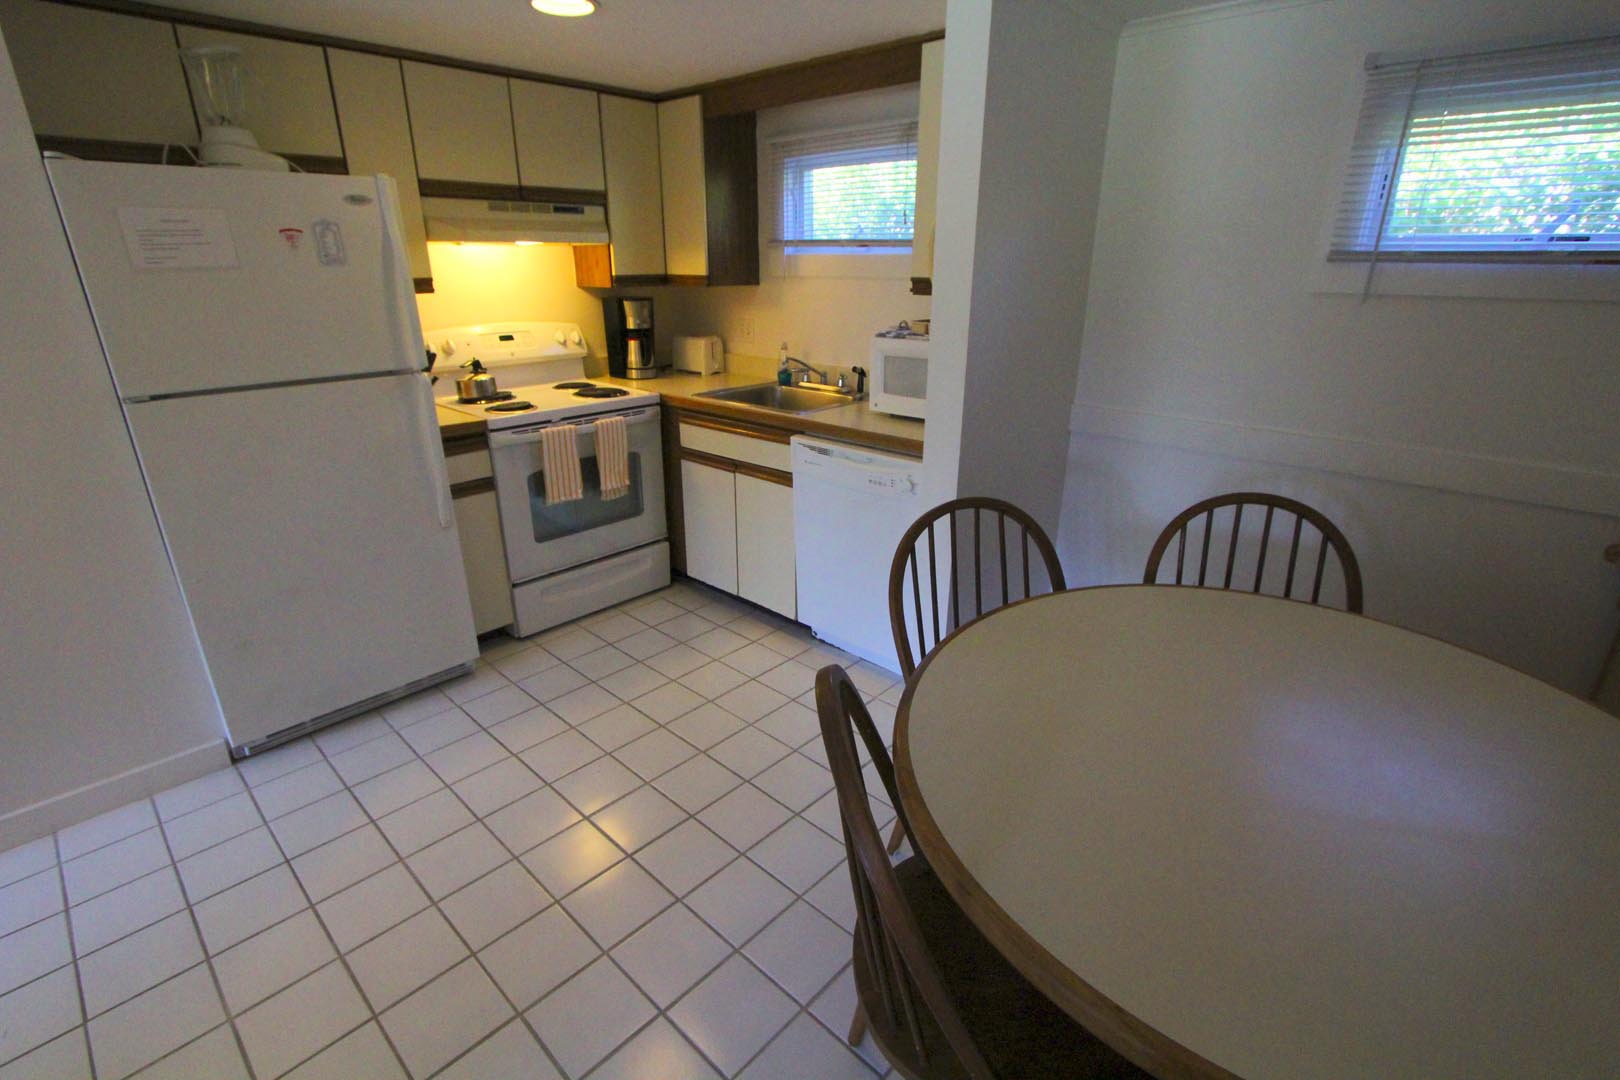 A crisp and clean kitchen area at VRI's Brant Point Courtyard in Massachusetts.